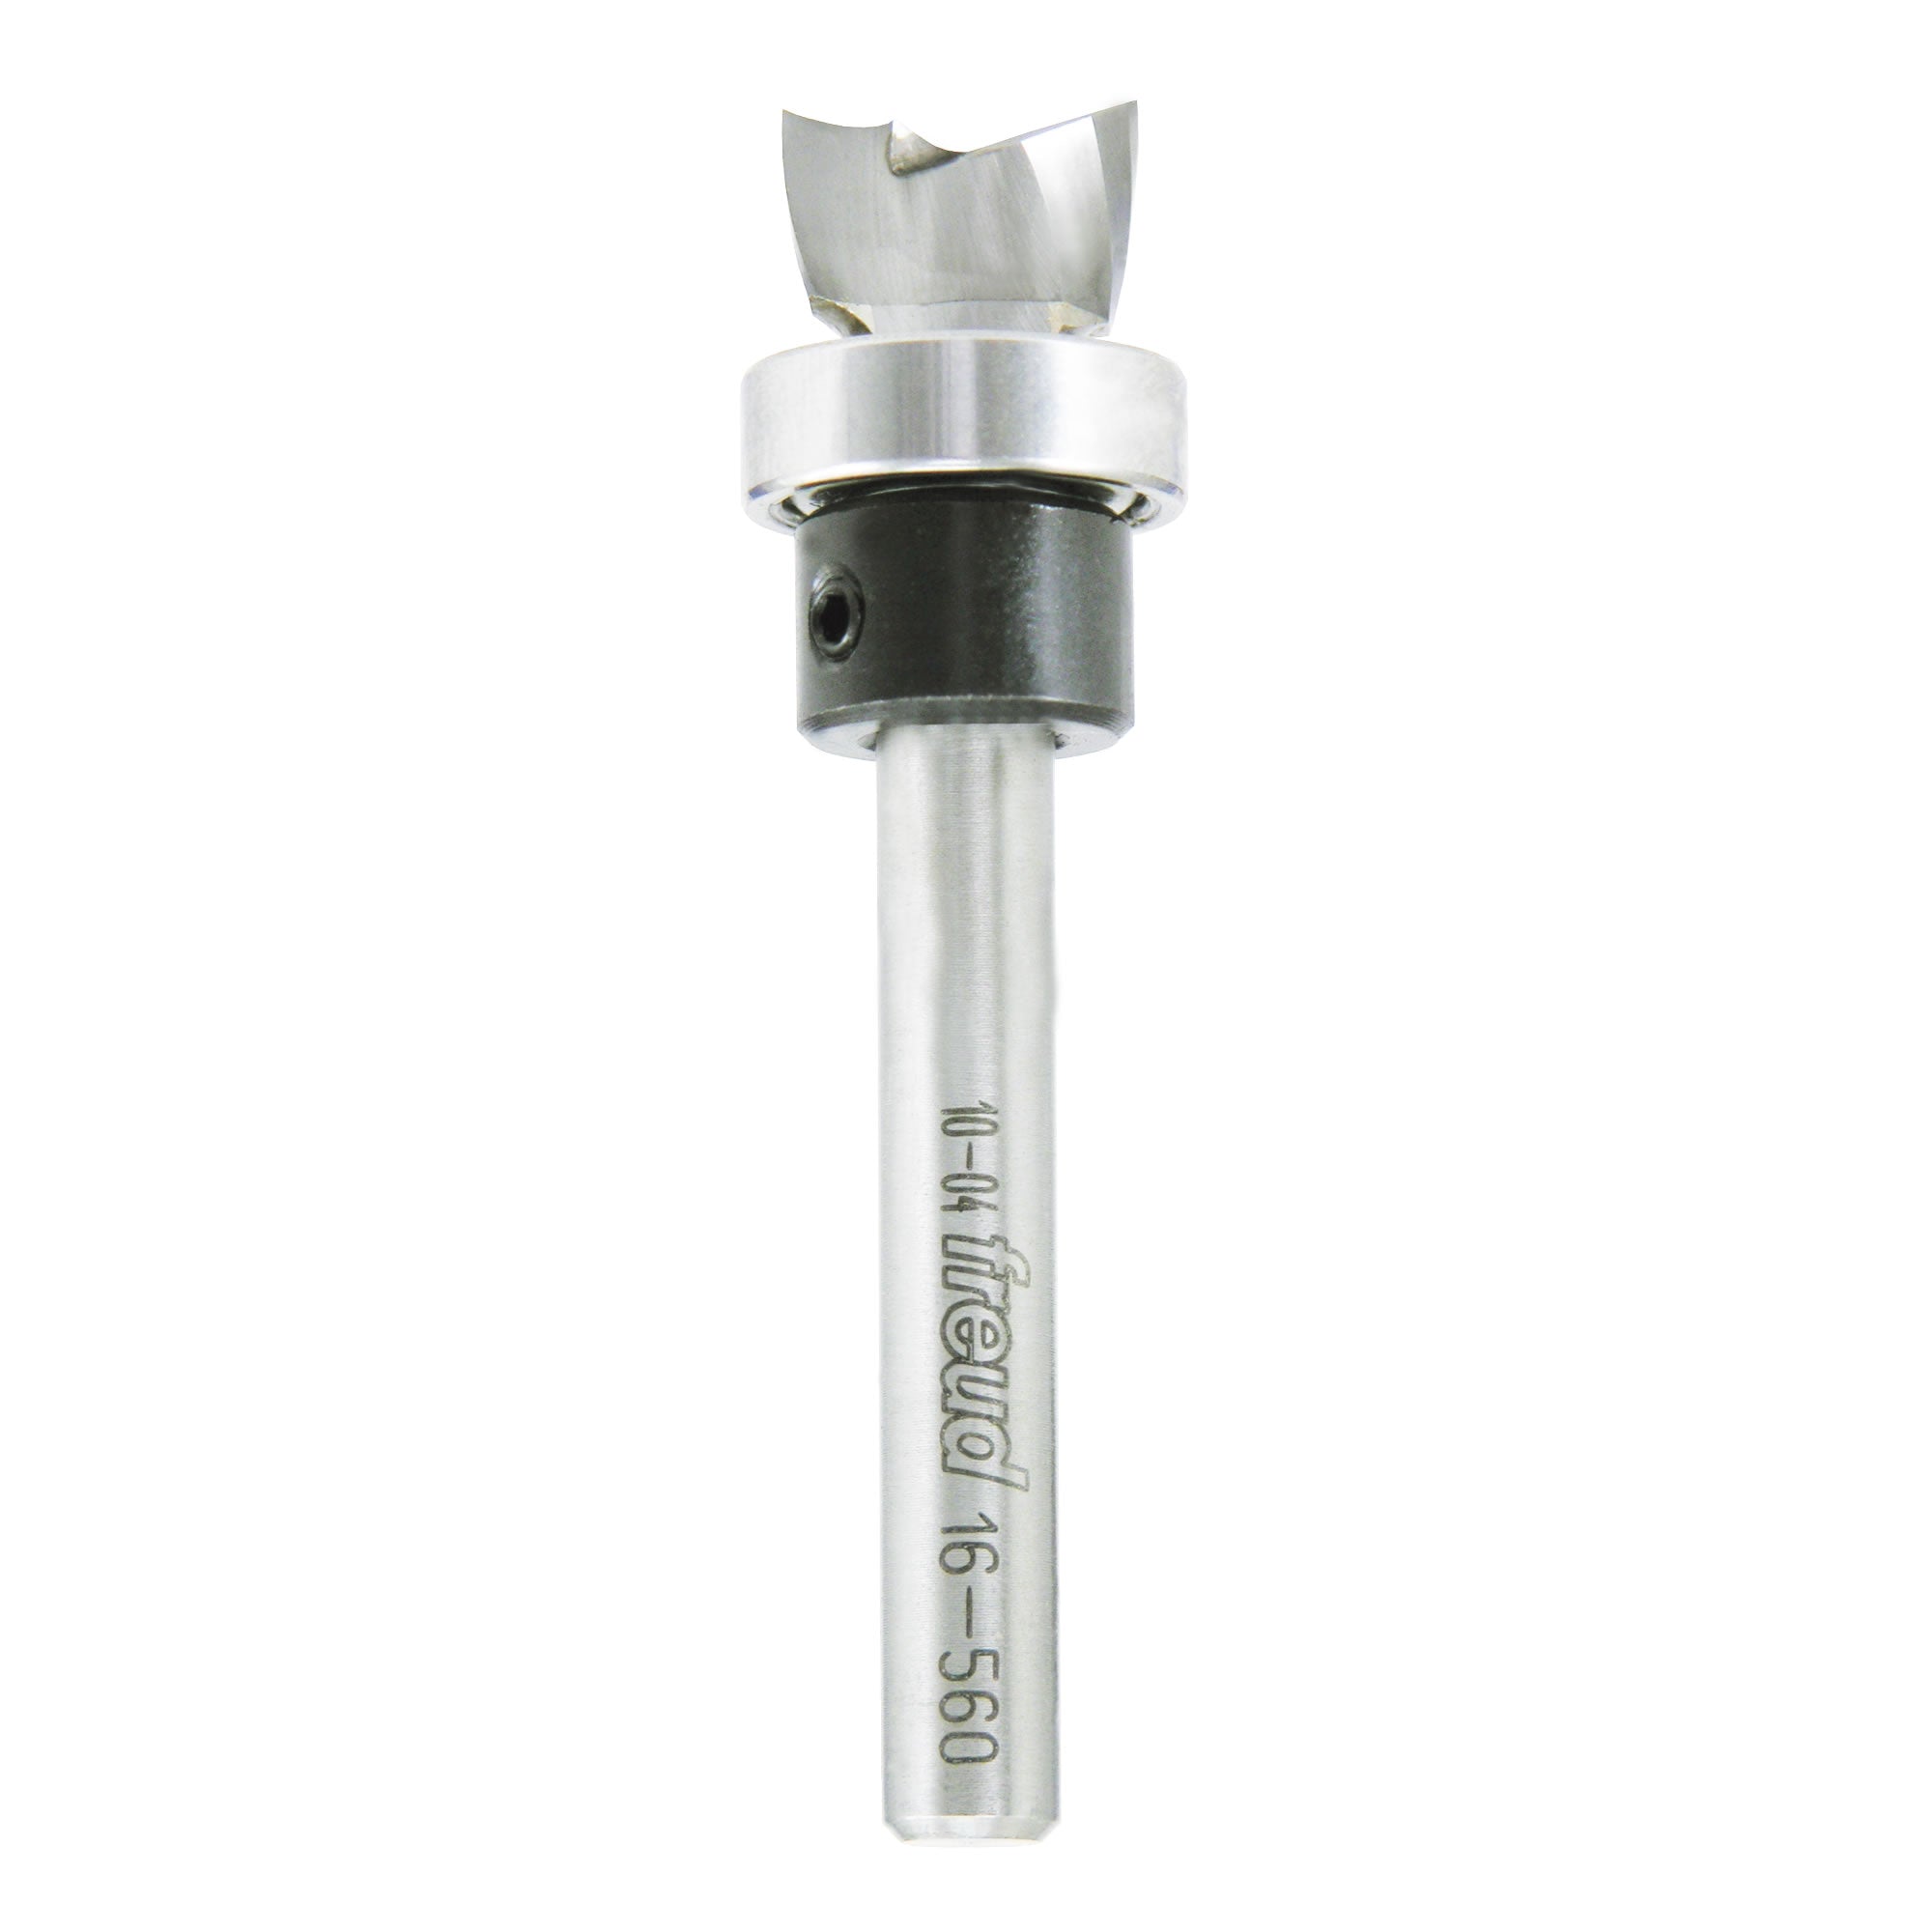 Freud  16-560 1/2" (Dia.) Mortising Bit  with 1/4" Shank